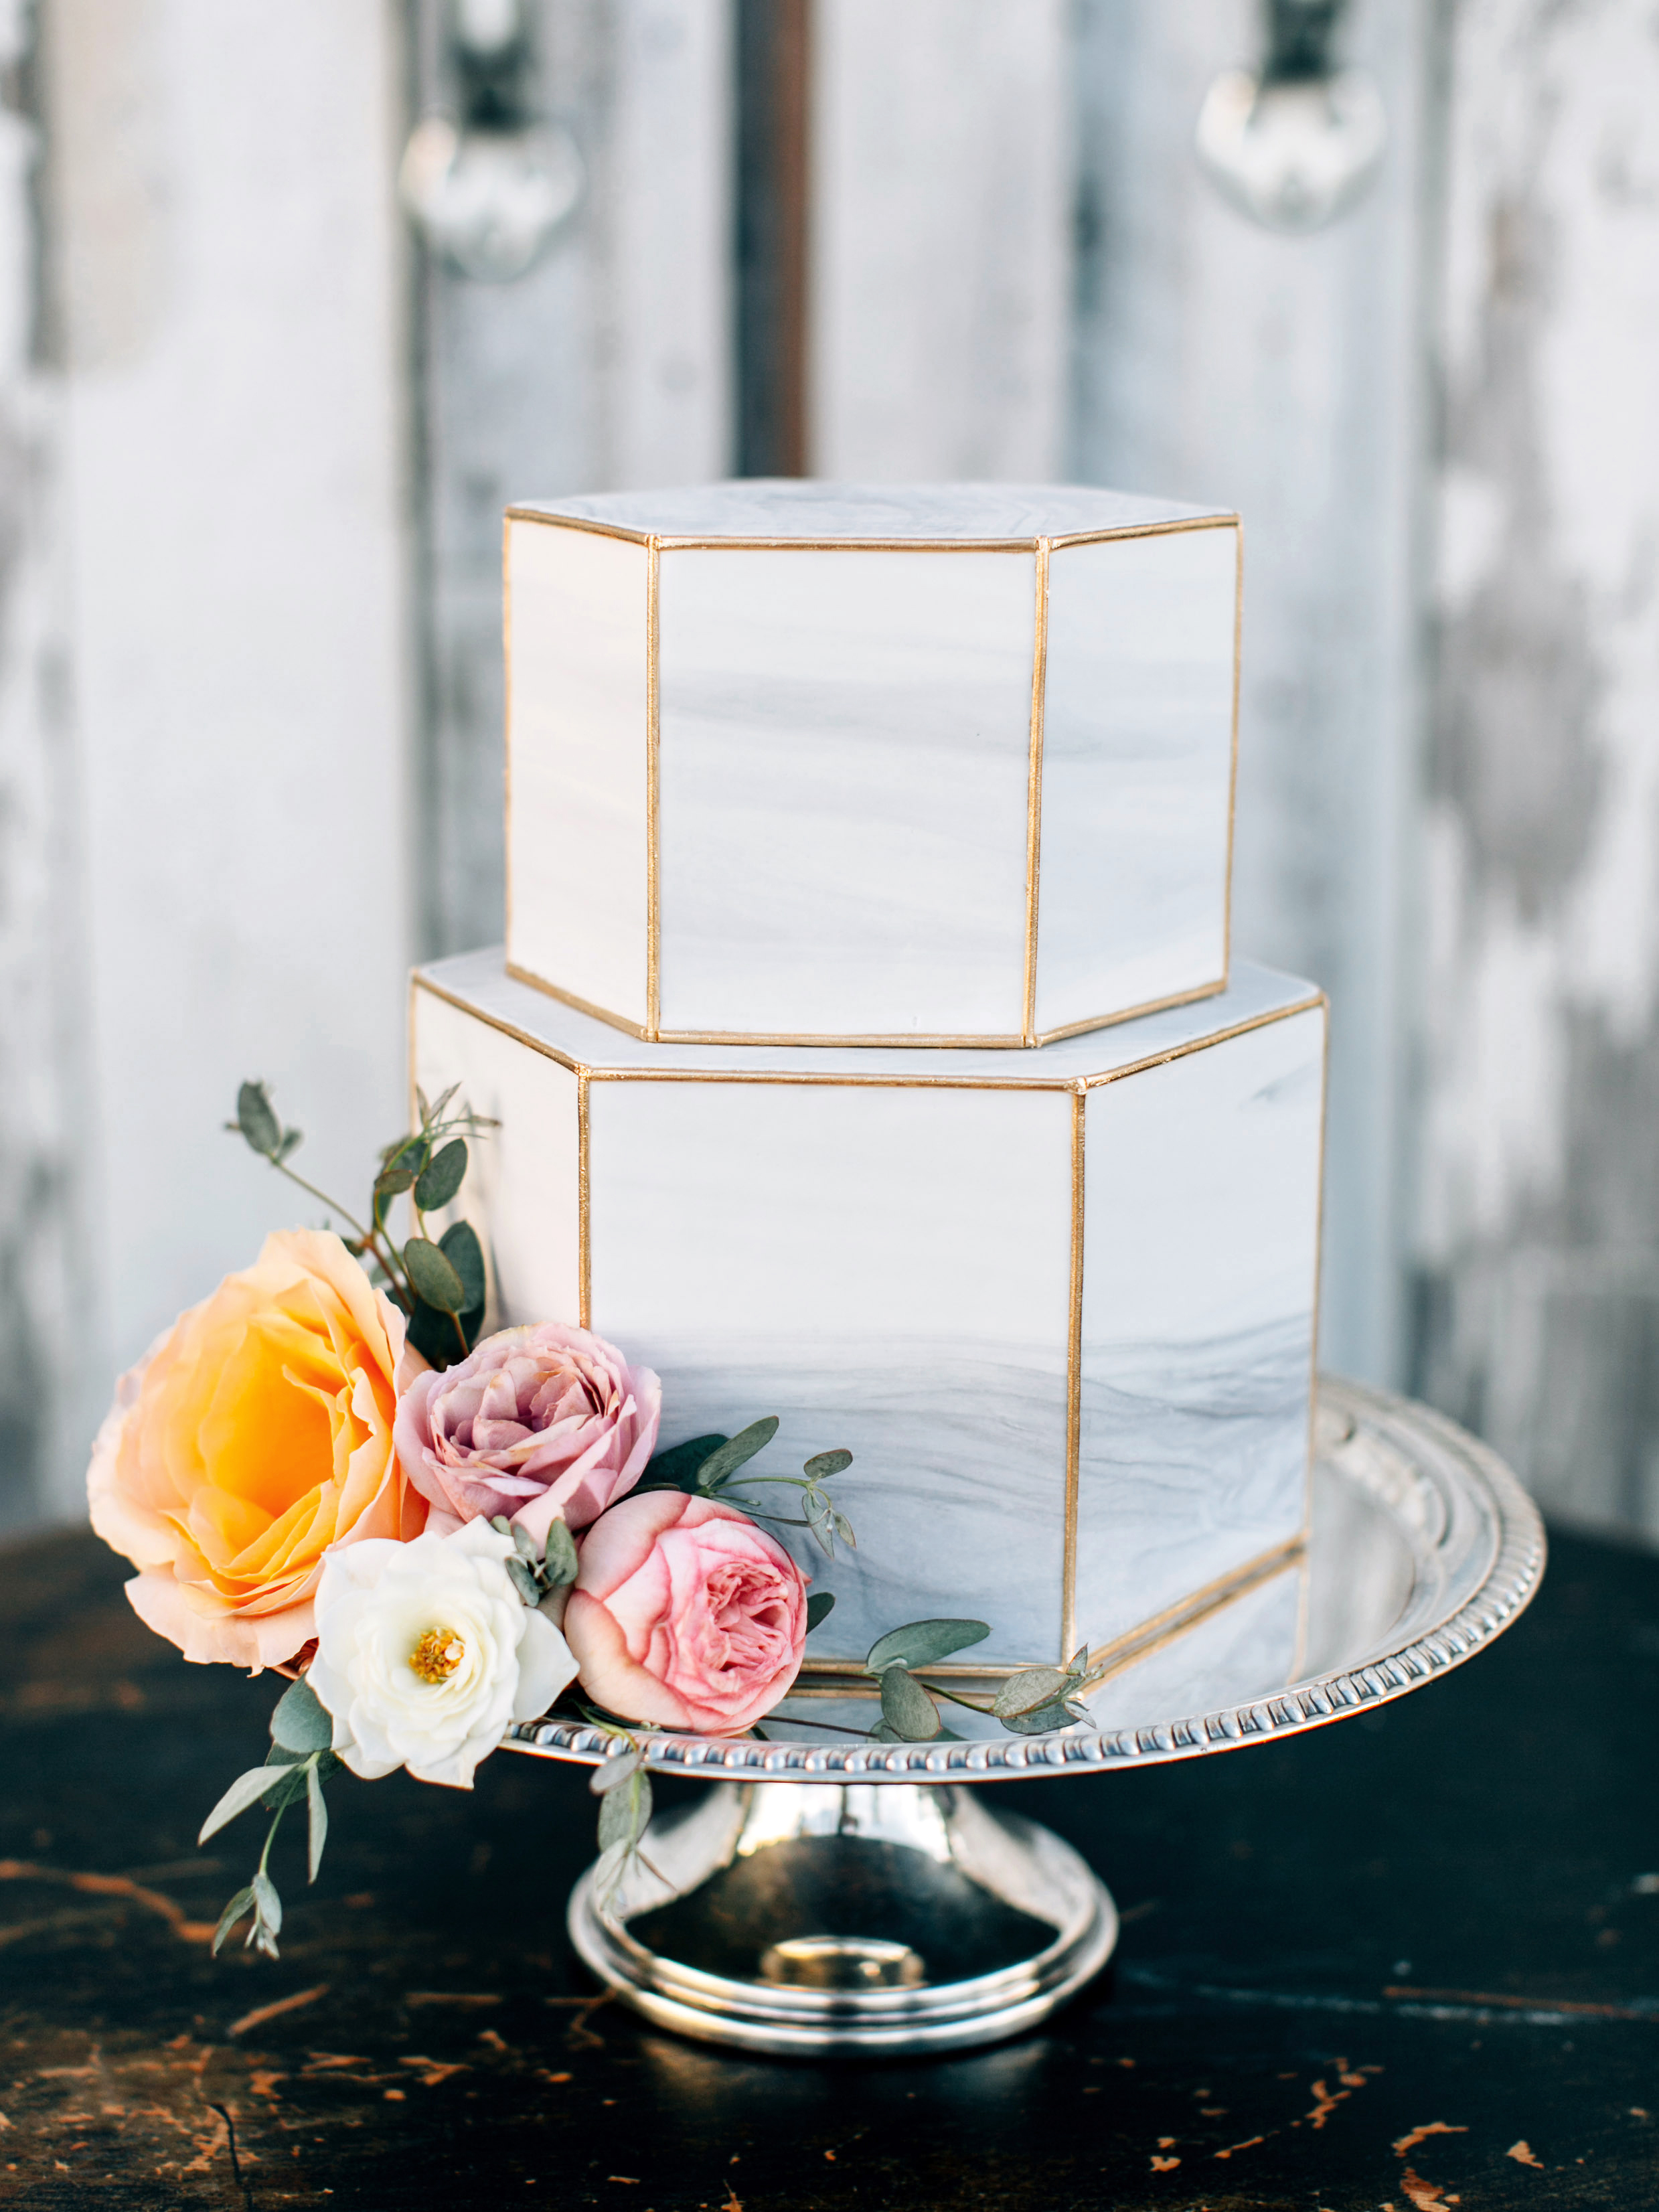 25 Wedding  Cake  Design  Ideas  That ll Wow Your Guests 